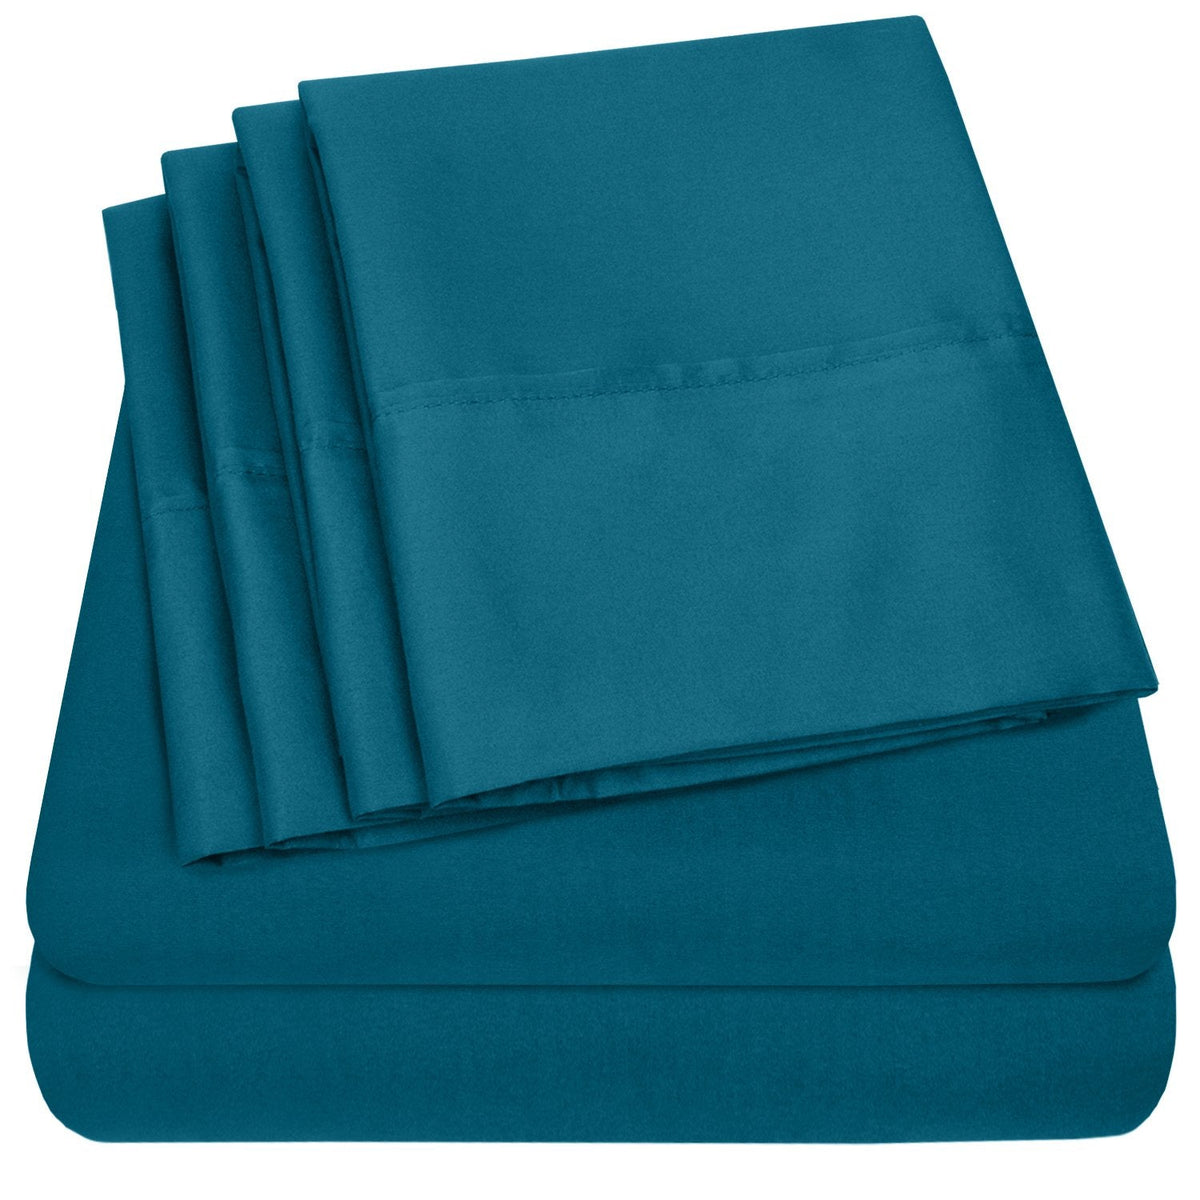 Deluxe 6-Piece Bed Sheet Set (Teal) - Folded